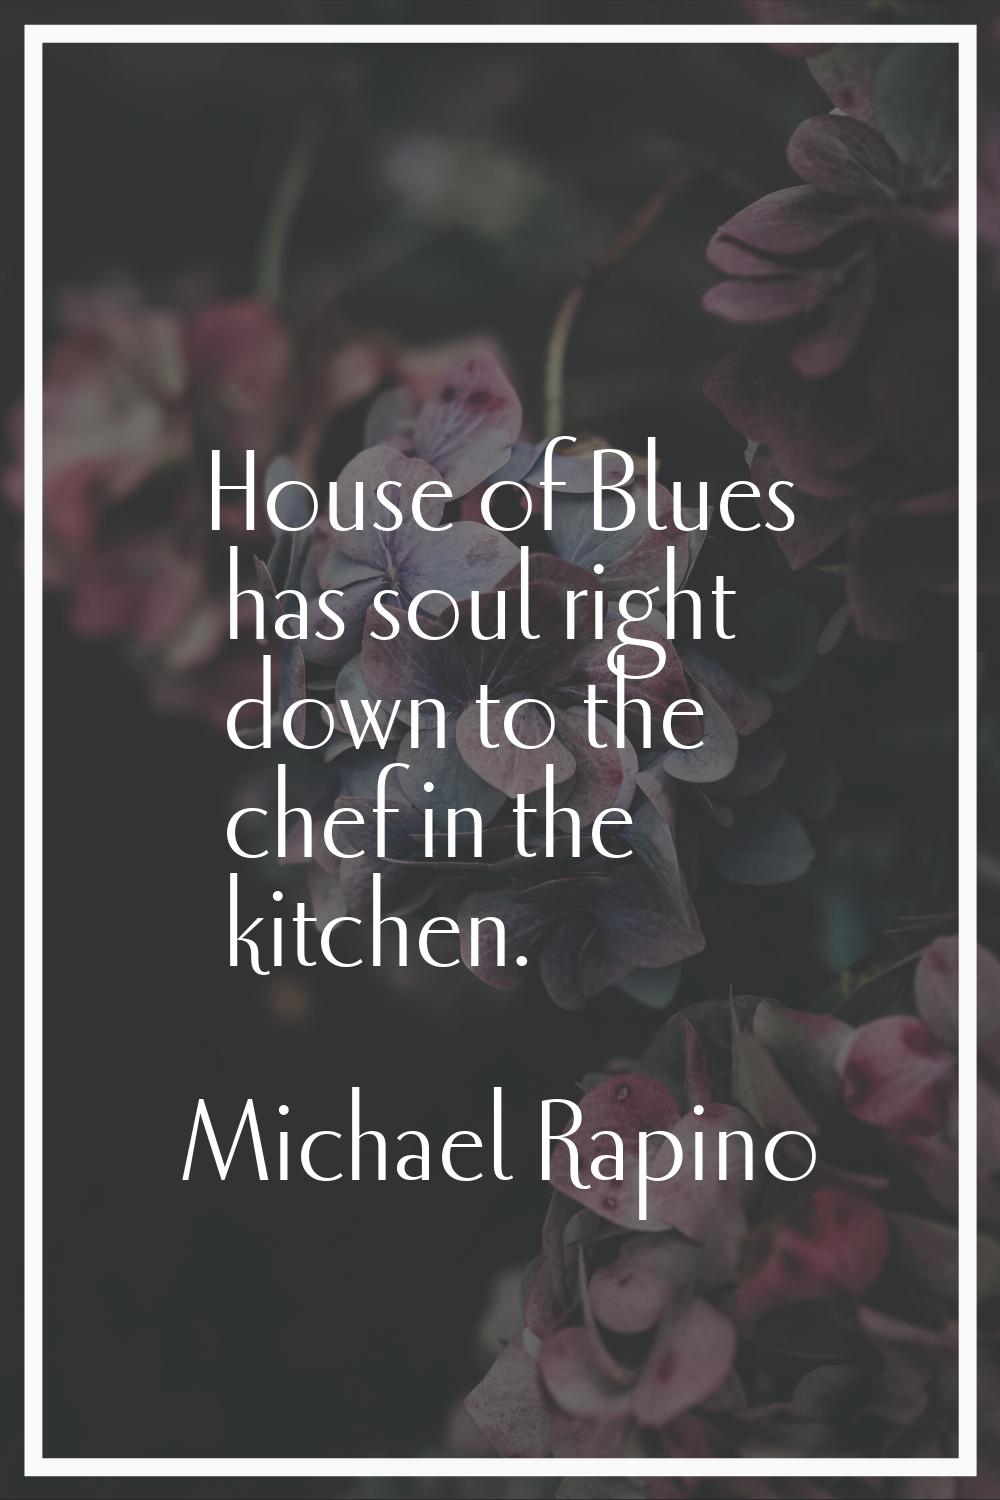 House of Blues has soul right down to the chef in the kitchen.